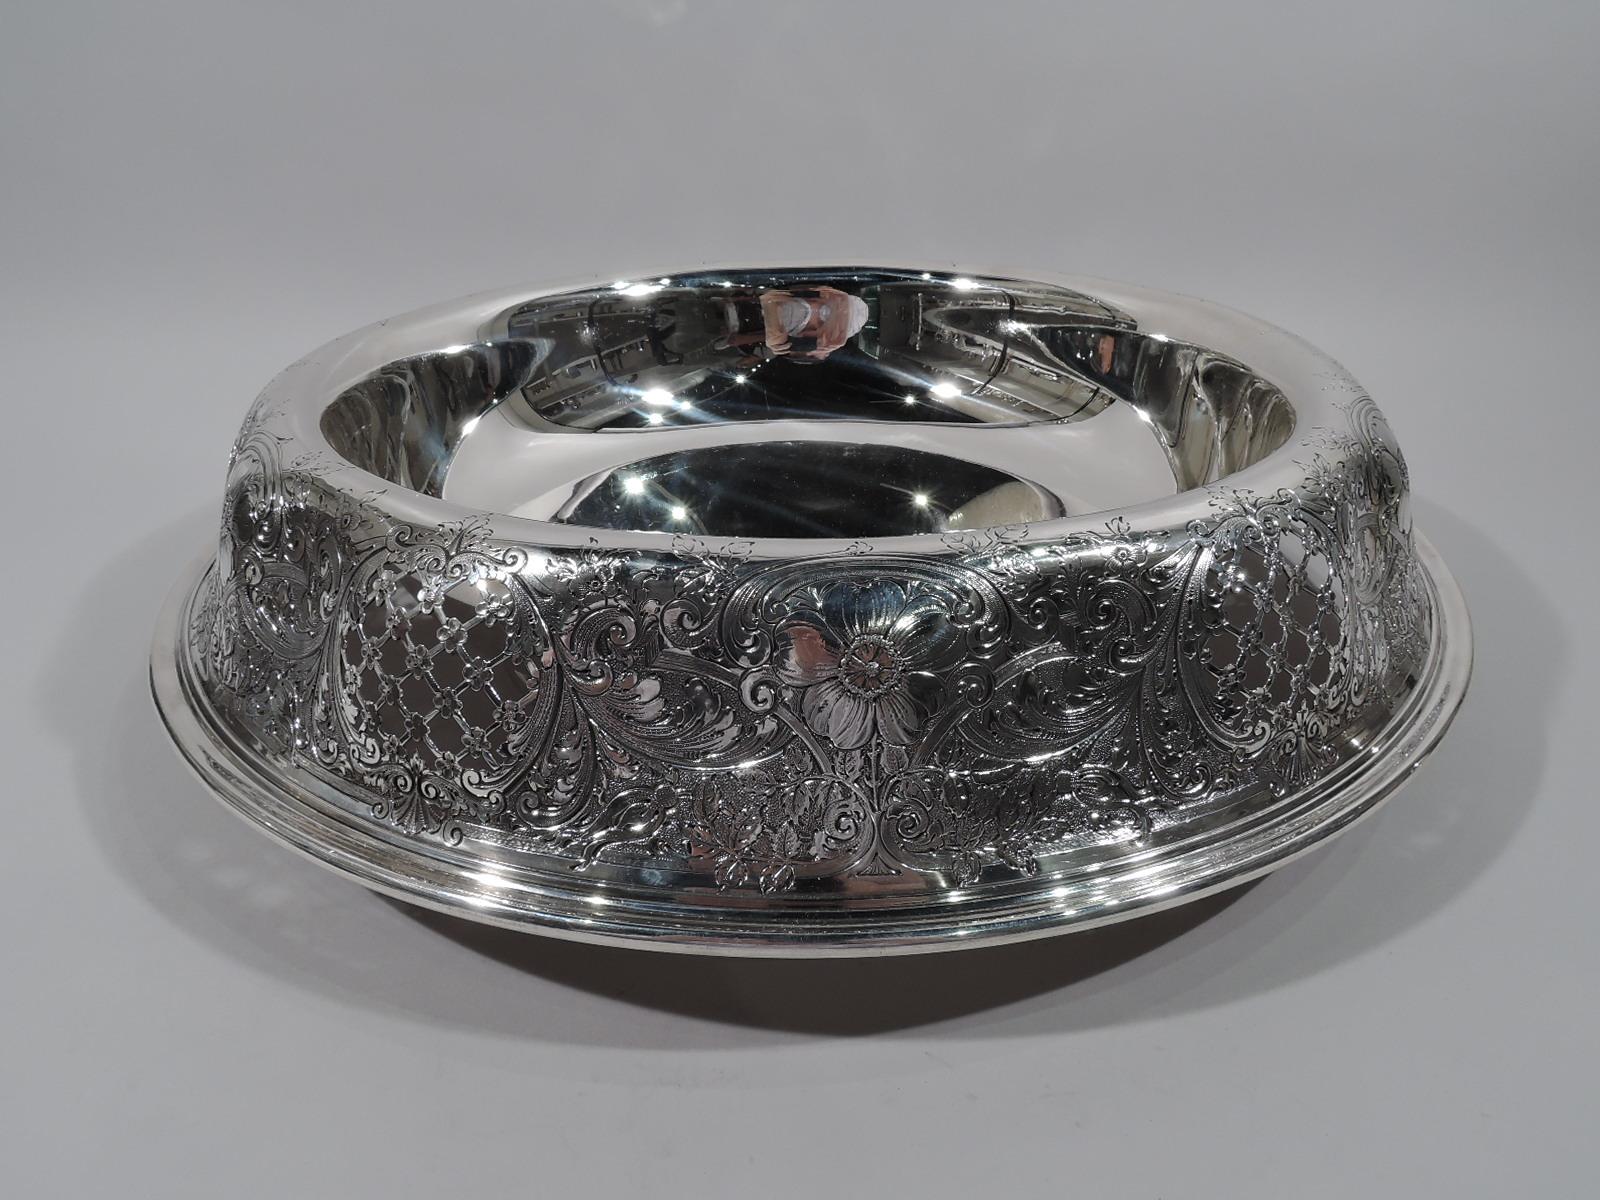 Very large Edwardian sterling silver bowl. Made by Gorham in Providence in 1912. Plain well with lobed and turned-down sides with fluid and dynamic chased and engraved ornament comprising pierced floral diaper set in scrolled frames alternating with